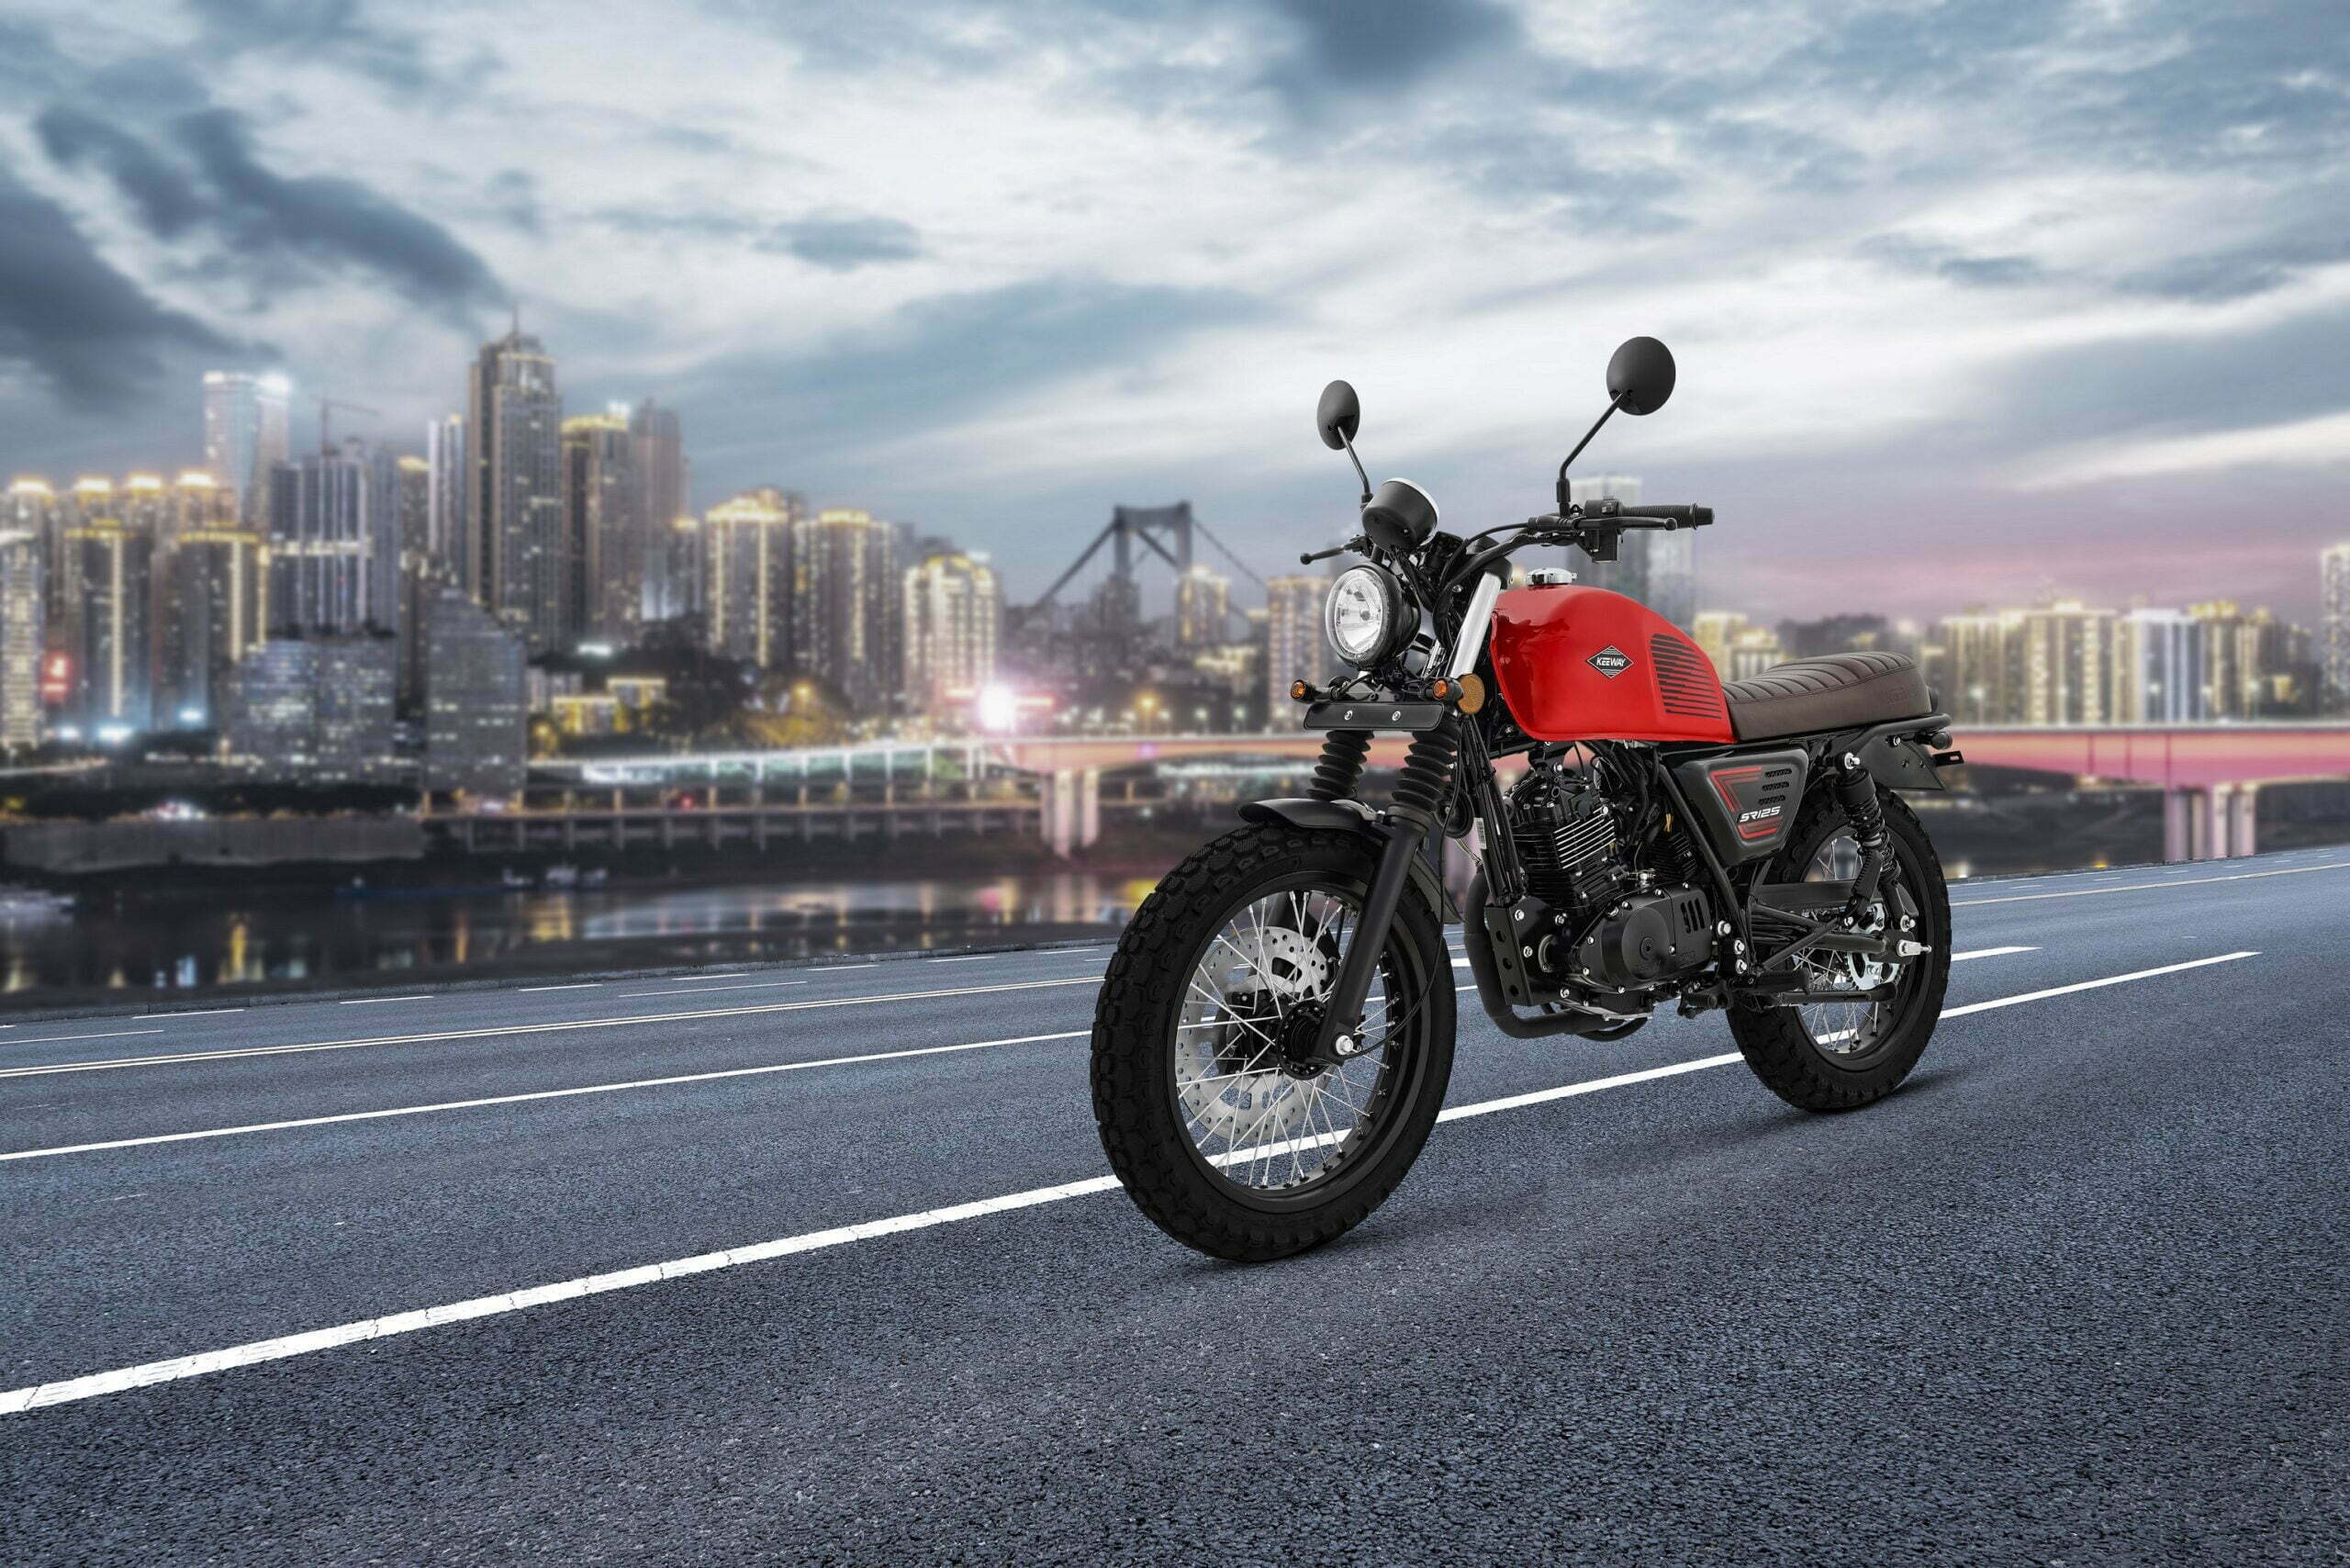 Keeway SR125 Launches In The Indian Market - Premium 125cc!